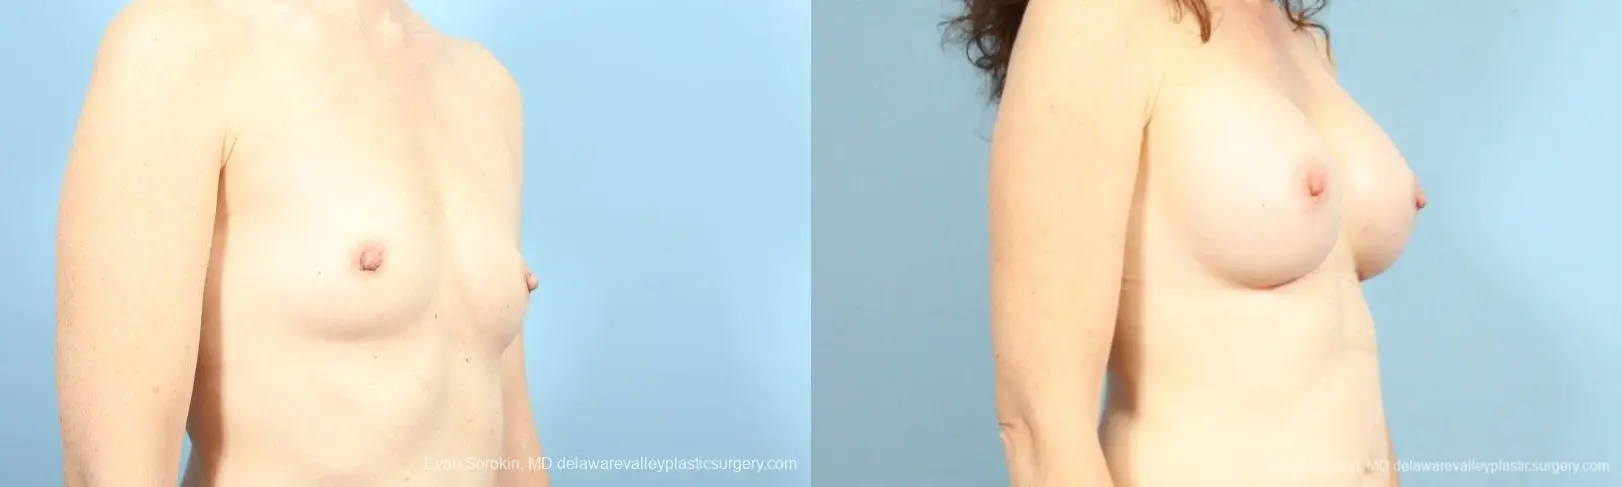 Philadelphia Breast Augmentation 8662 - Before and After 2